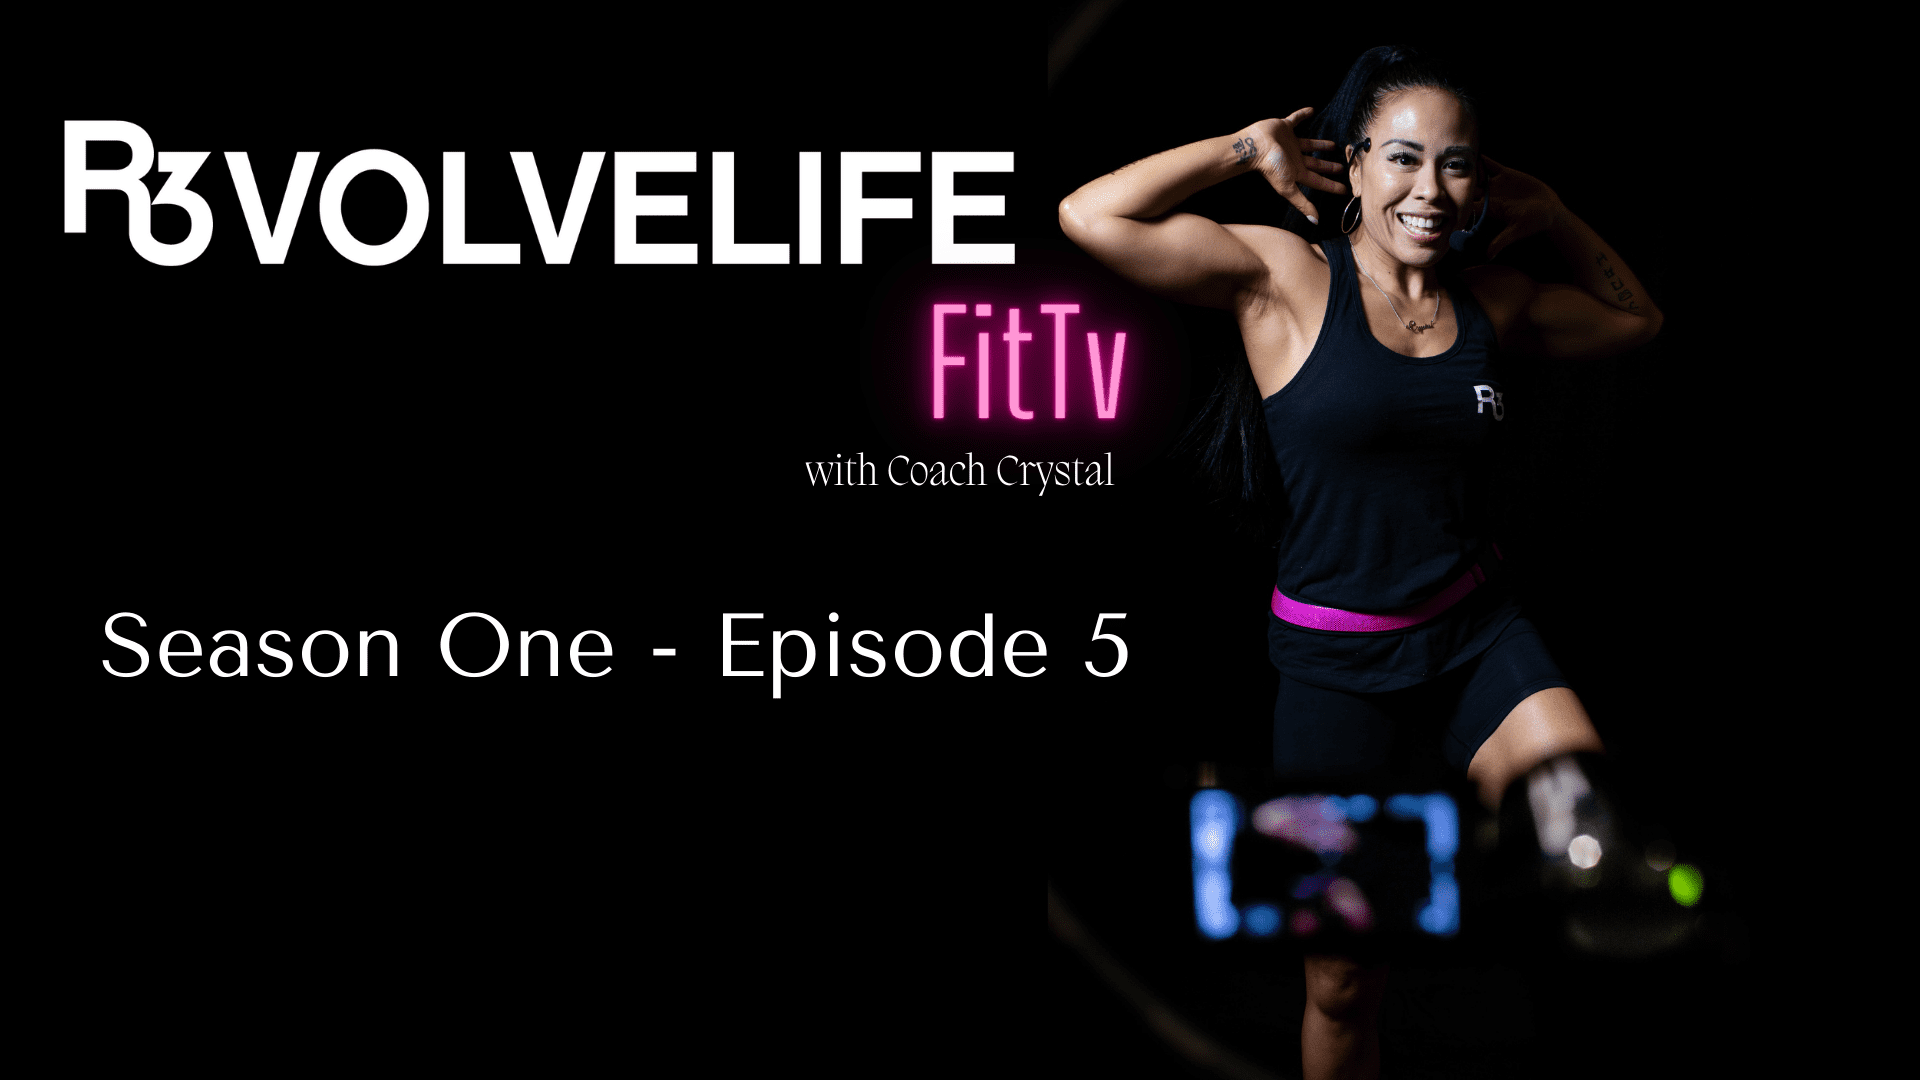 R3VOLVELIFE FIT TV with Coach Crystal – Episode 5